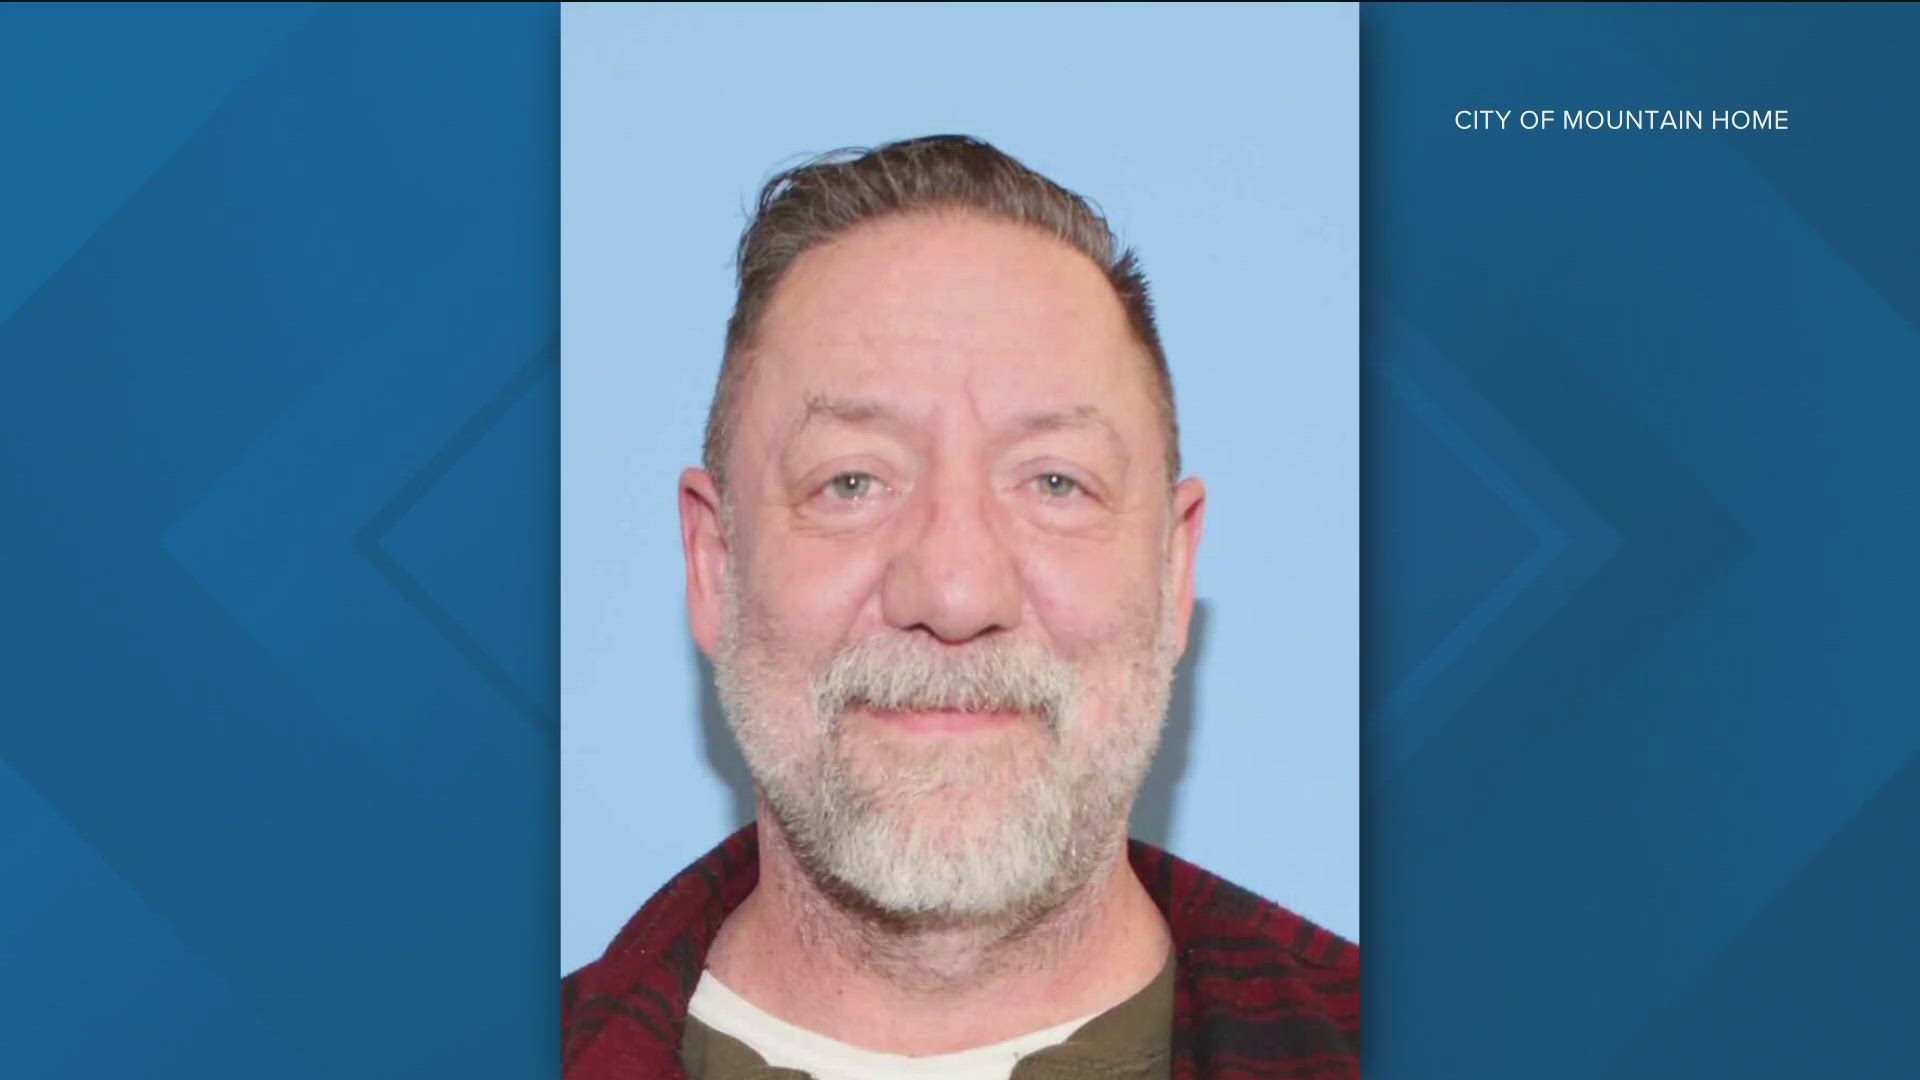 Thunderbird Motel homicide suspect, 58-year-old Brian M. McGehee, was apprehended Tuesday, suspending Mountain Home Police Department's week-long manhunt.